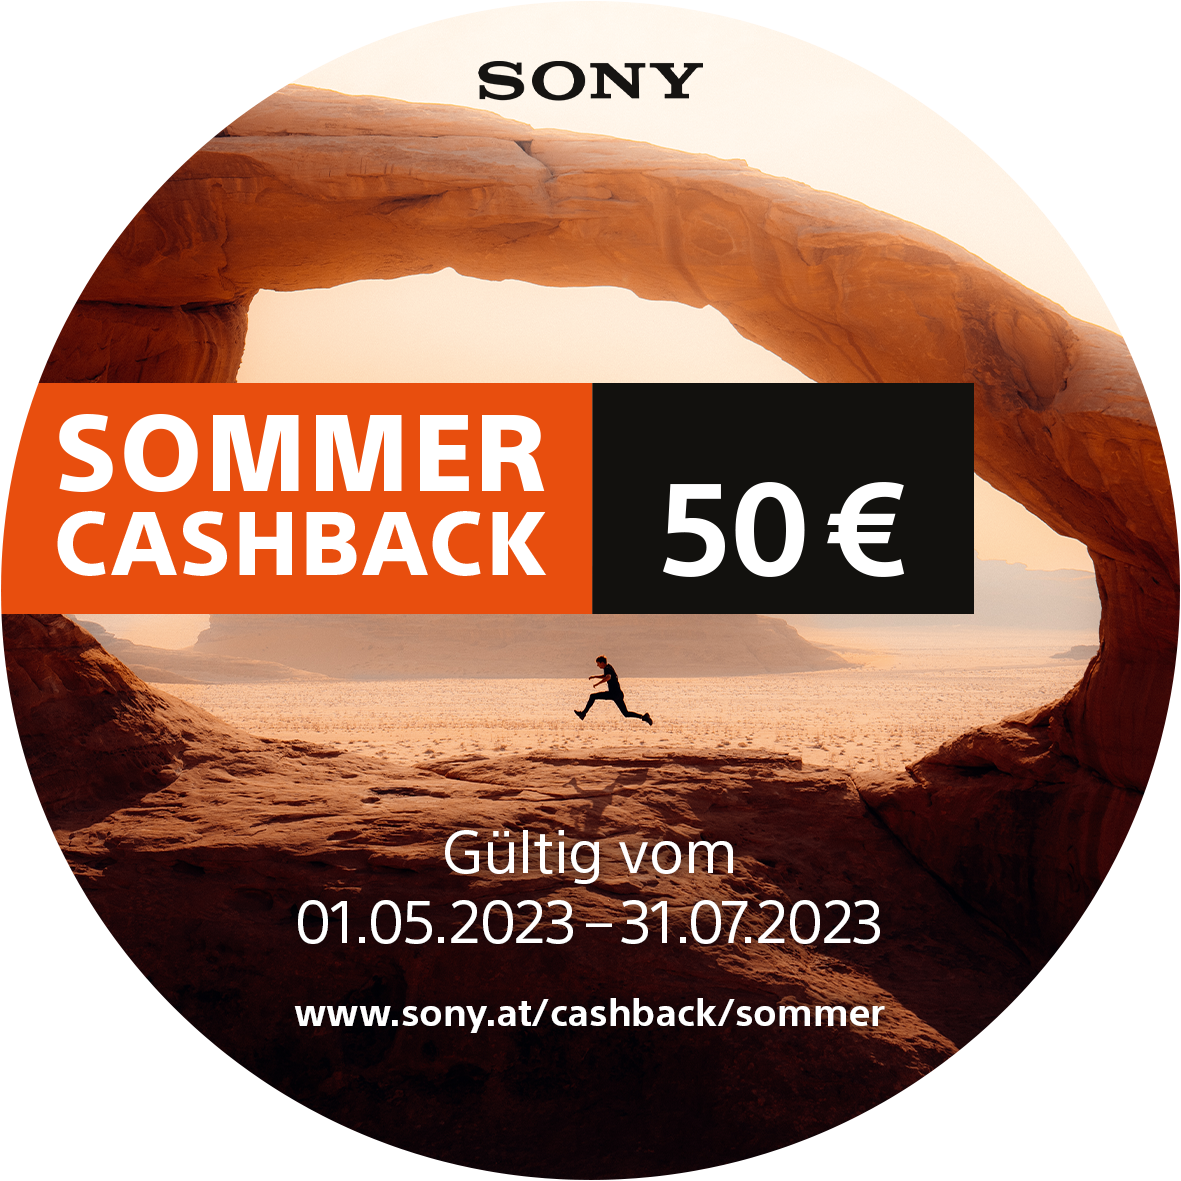 350 6 CHAT DI Sommer Cashback Online Button r4 ATDE 50